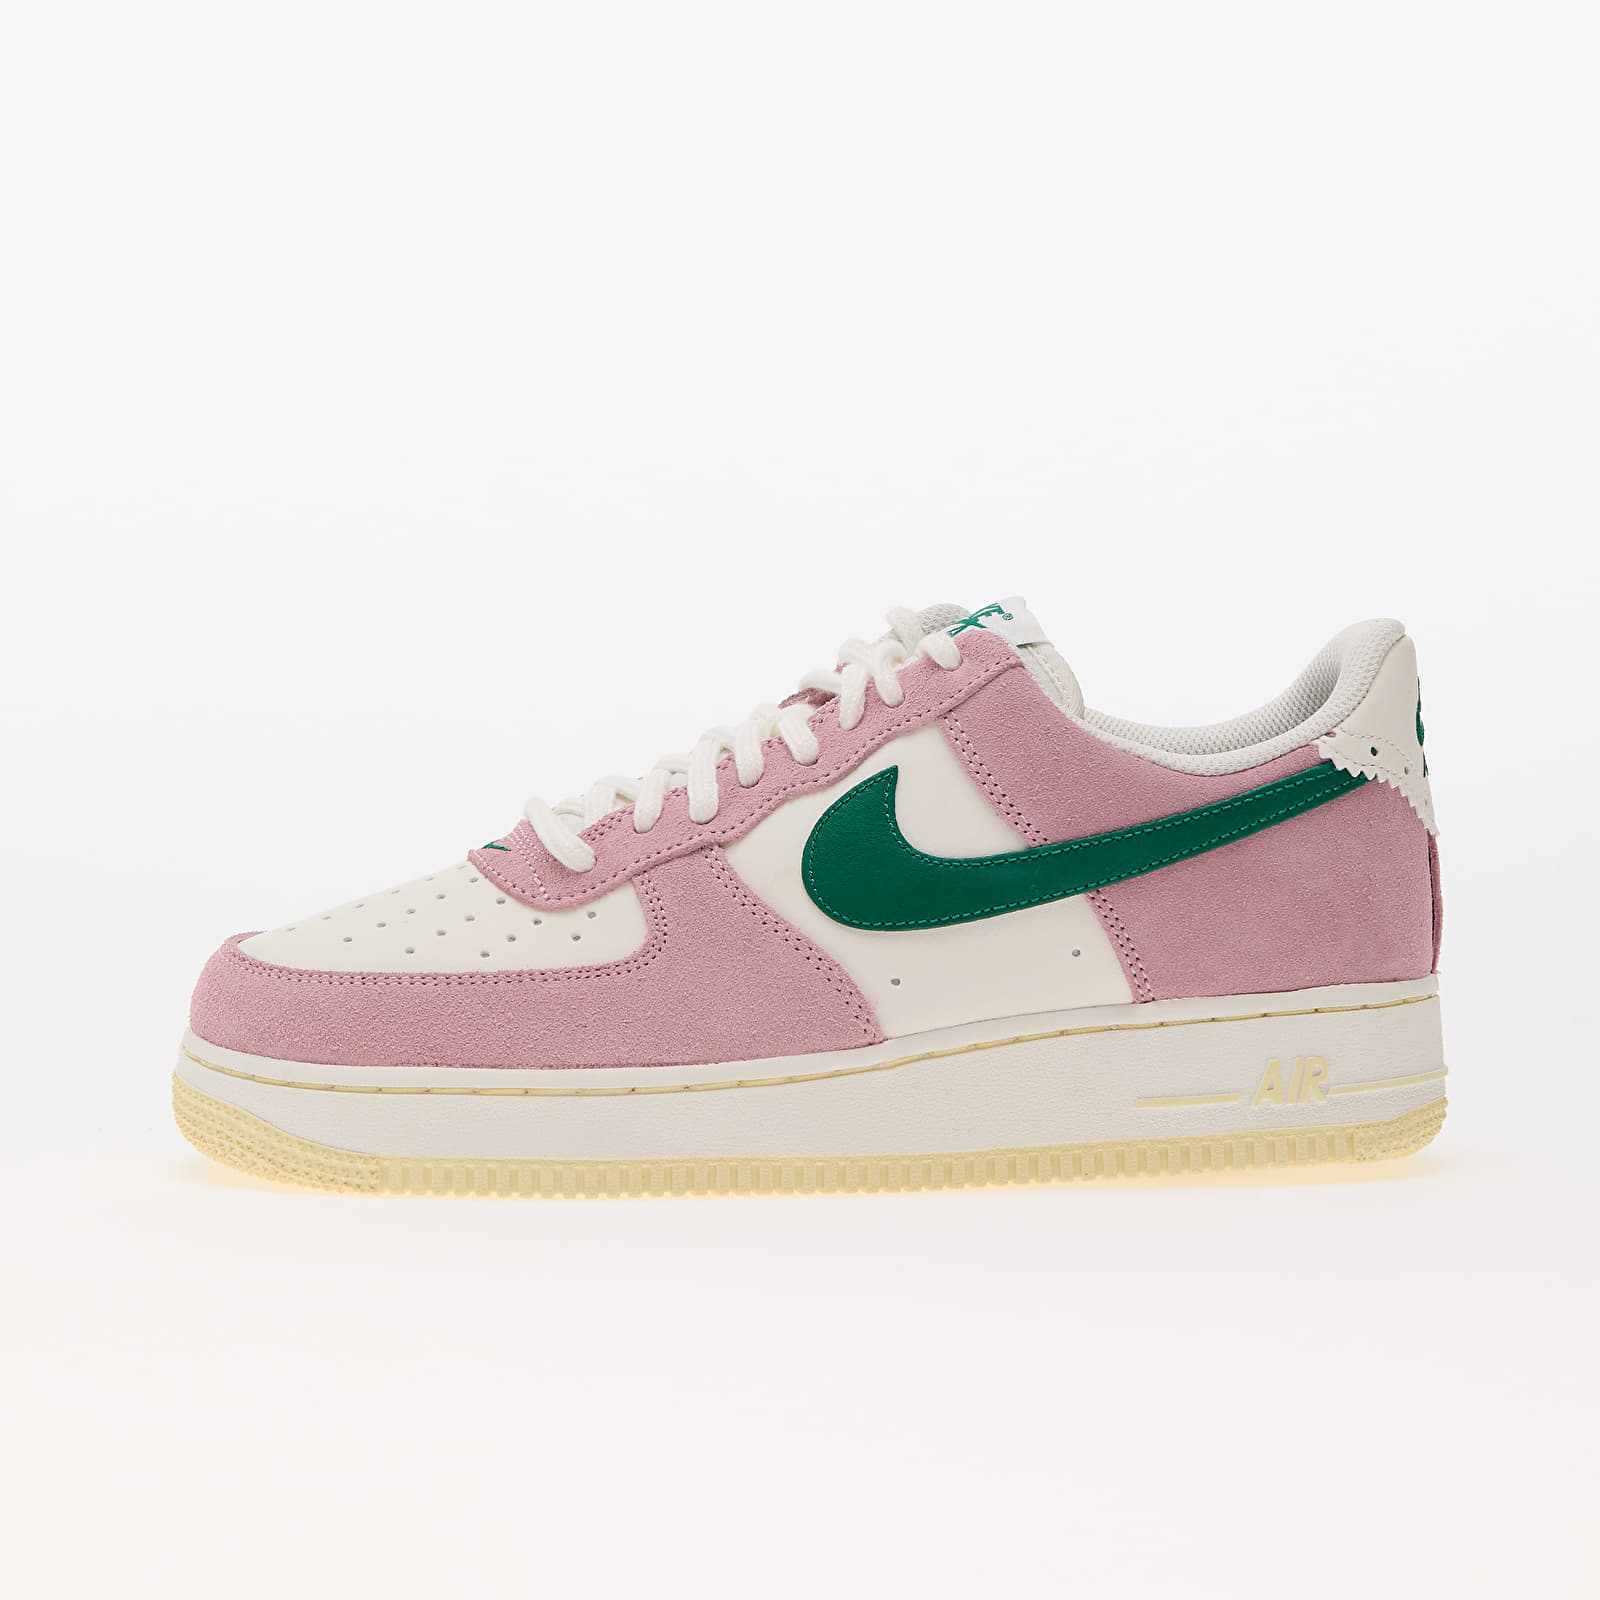 Herenschoenen Nike Air Force 1 '07 Lv8 Nd Sail/ Malachite-Med Soft Pink-Alabaster